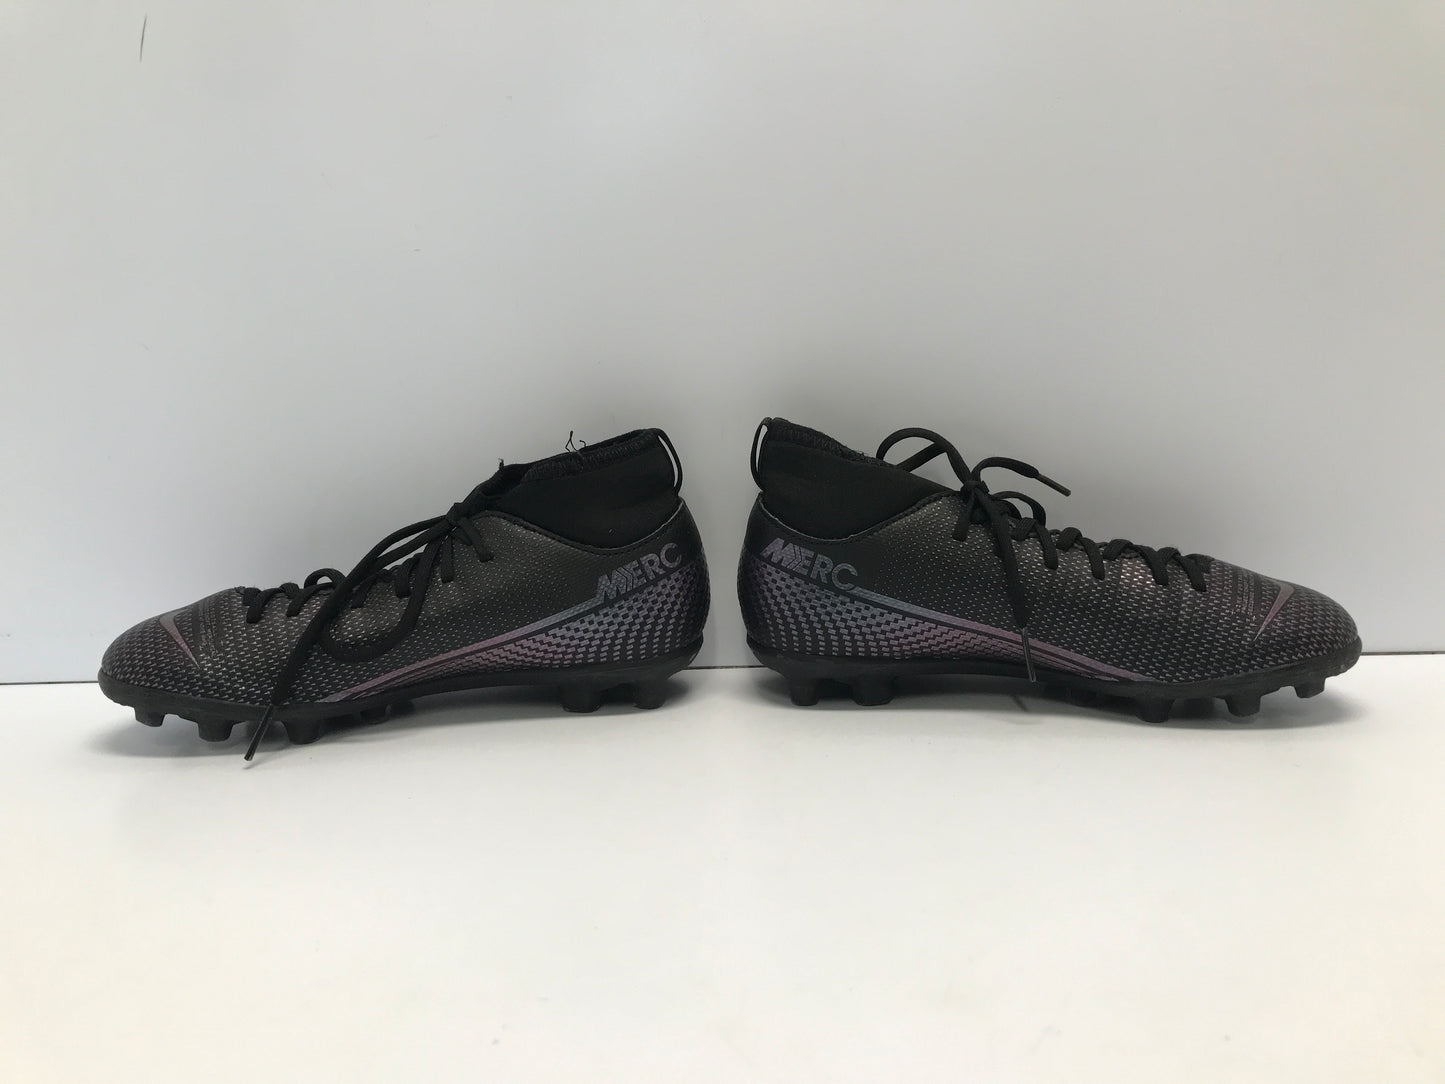 Soccer Shoes Cleats Child Size 2 Nike Mercurial Black Grey Slipper Foot Excellent